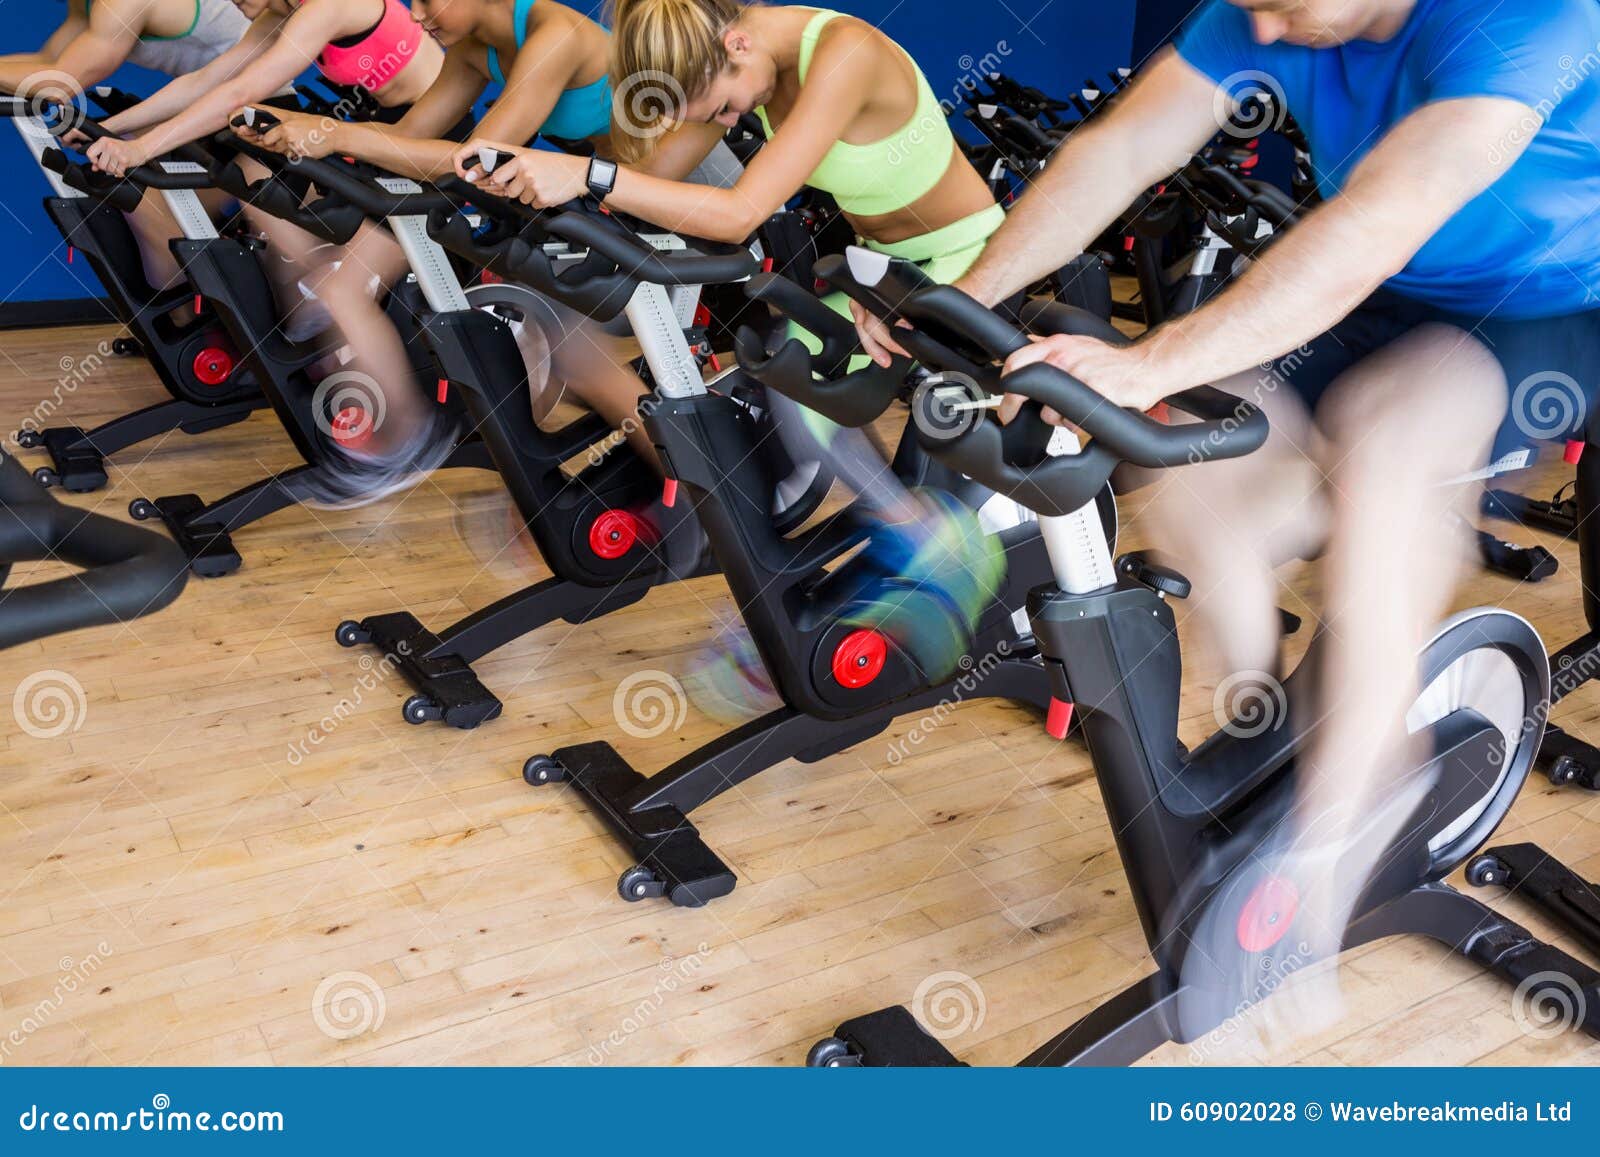 fit people in a spin class